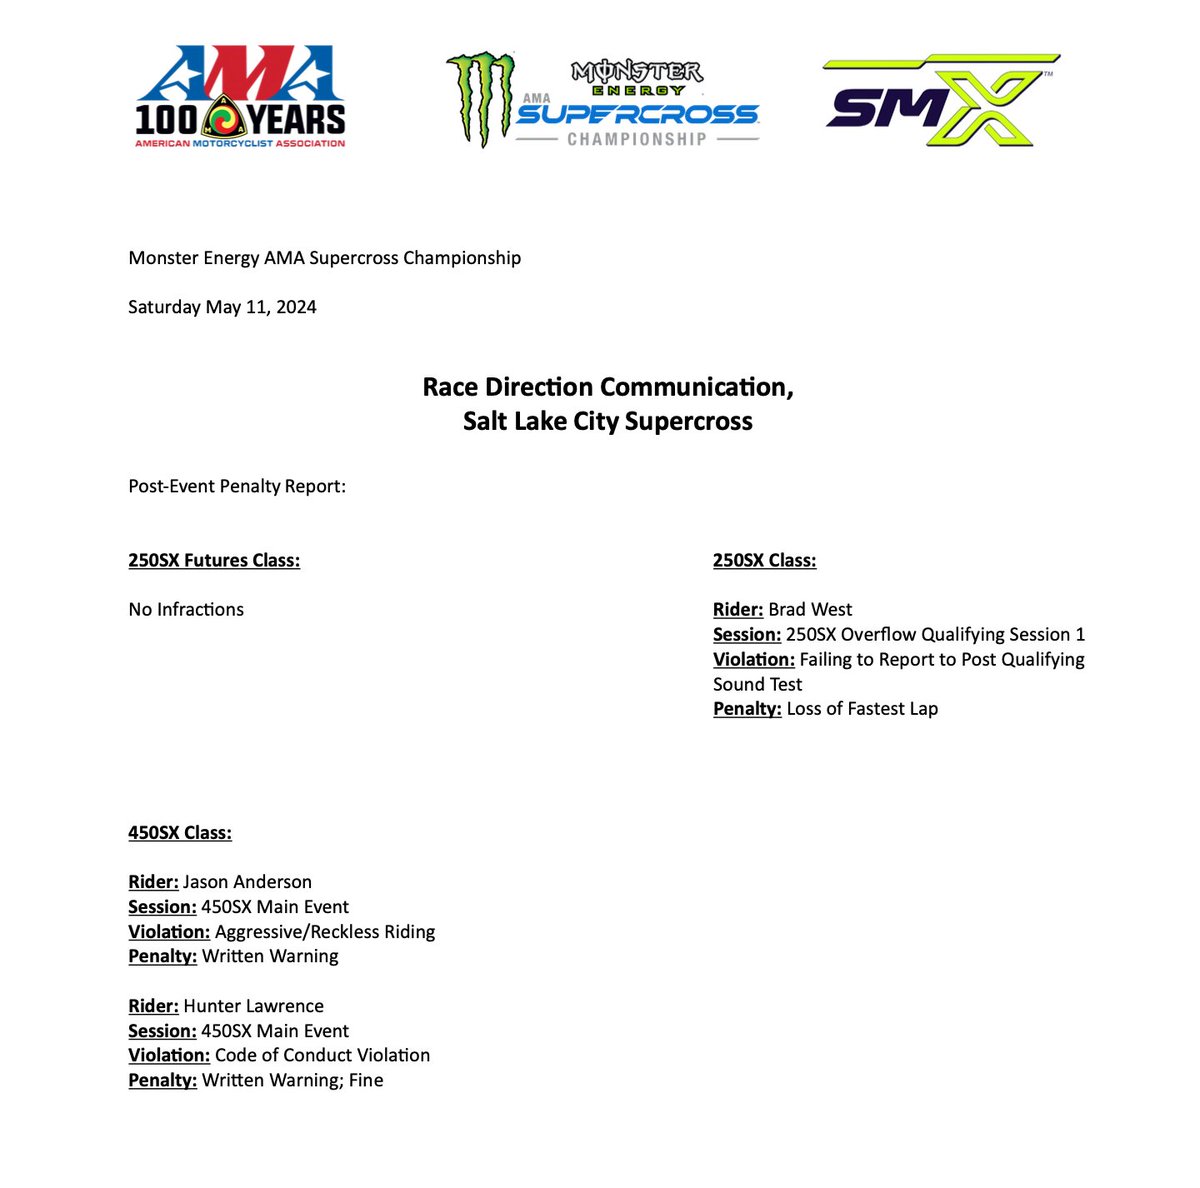 The AMA post-race penalty report notes a written warning for Jason Anderson and a written warning and fine for Hunter Lawrence from Saturday's 450SX main event incidents. #Supercross #SupercrossLIVE #SX2024 #SuperMotocross #SMX2024